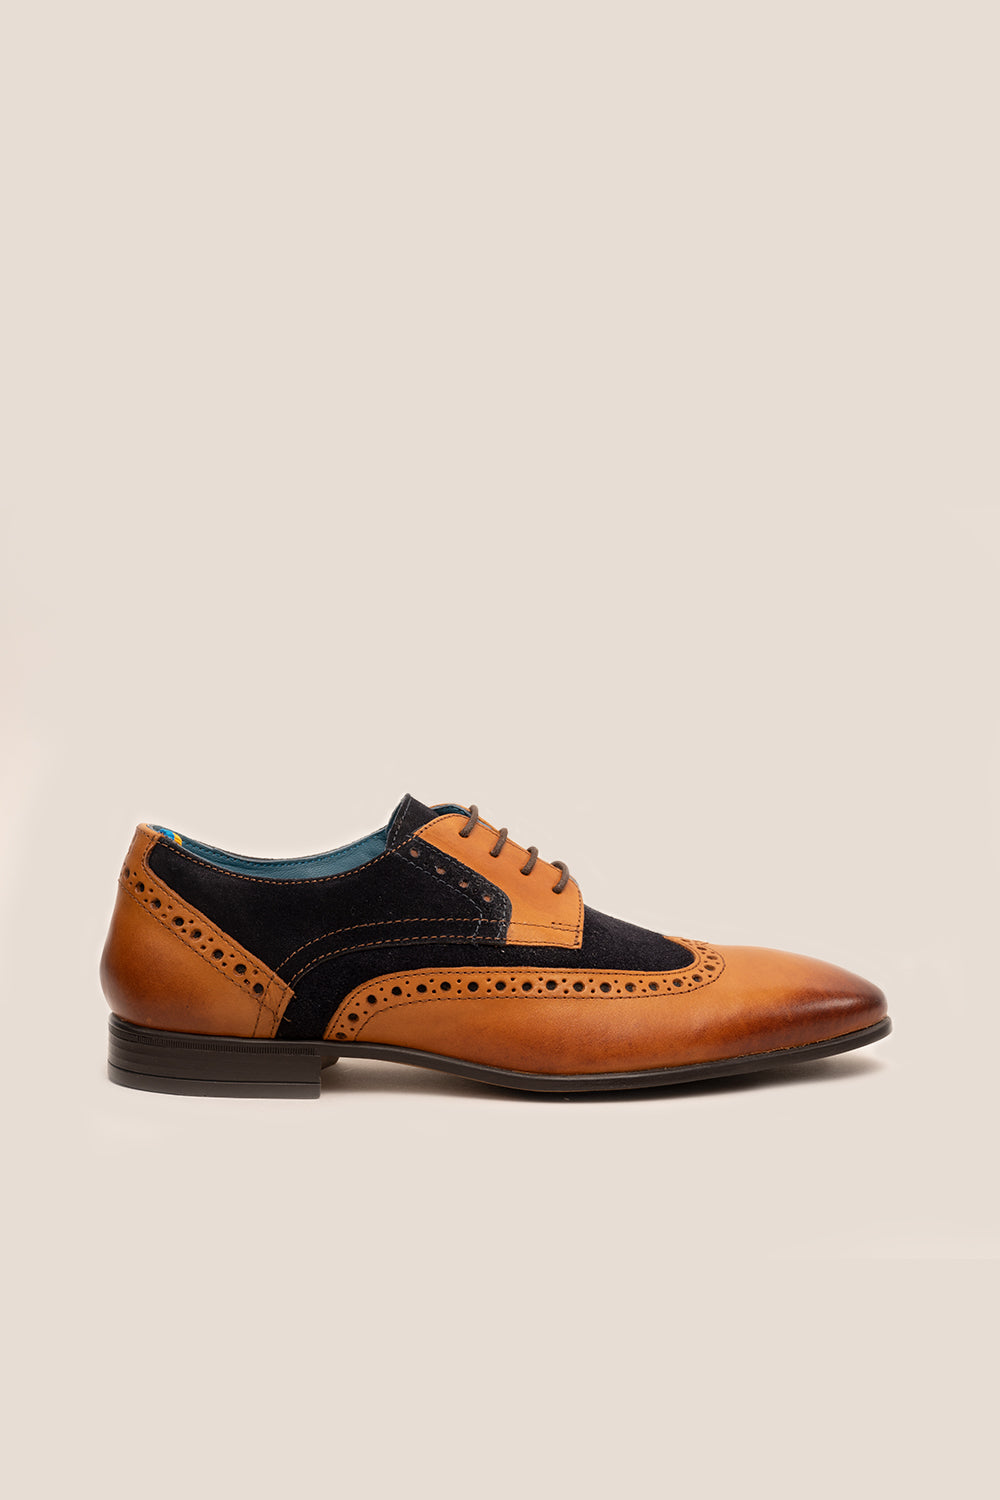 Mens Italian Leather & Suede Laced Smart Casual Brown Navy Black Designer  Shoes: Buy Online - Happy Gentleman United States